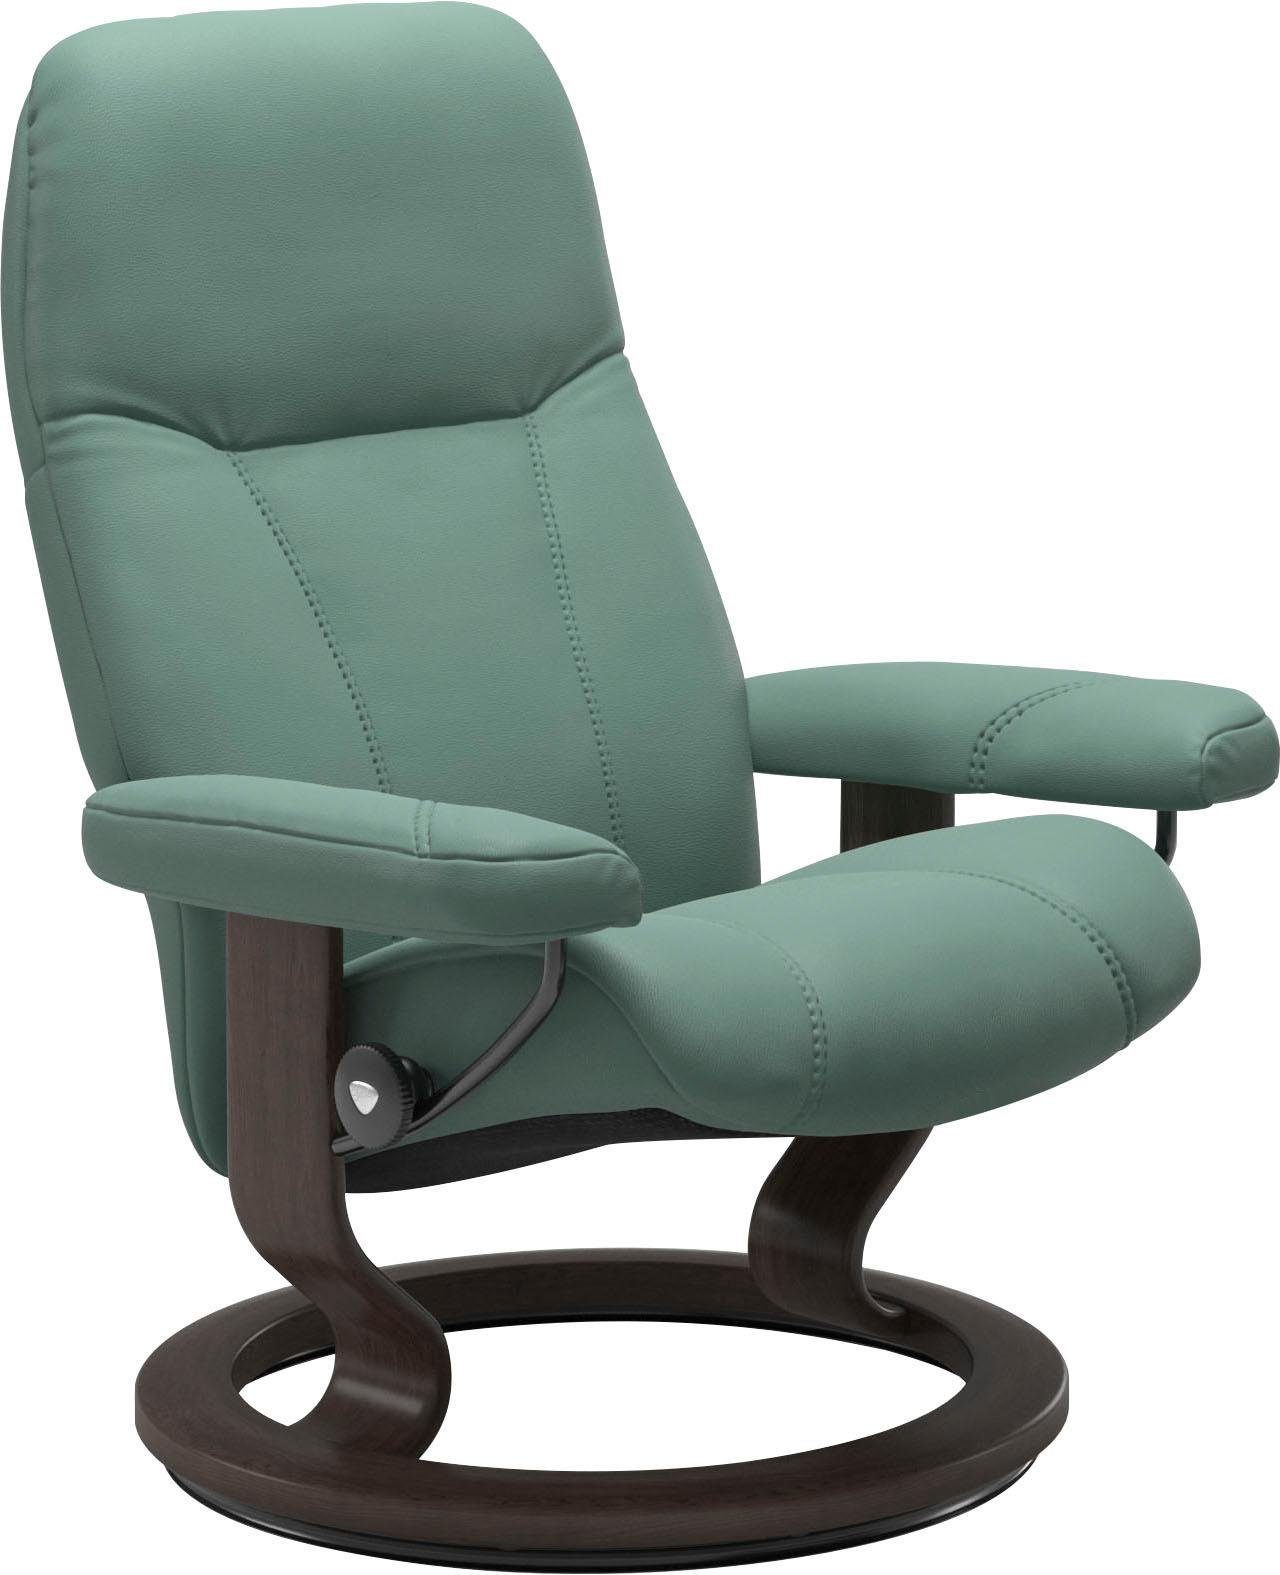 Classic Consul, mit Base, Wenge M, Gestell Größe Relaxsessel Stressless®